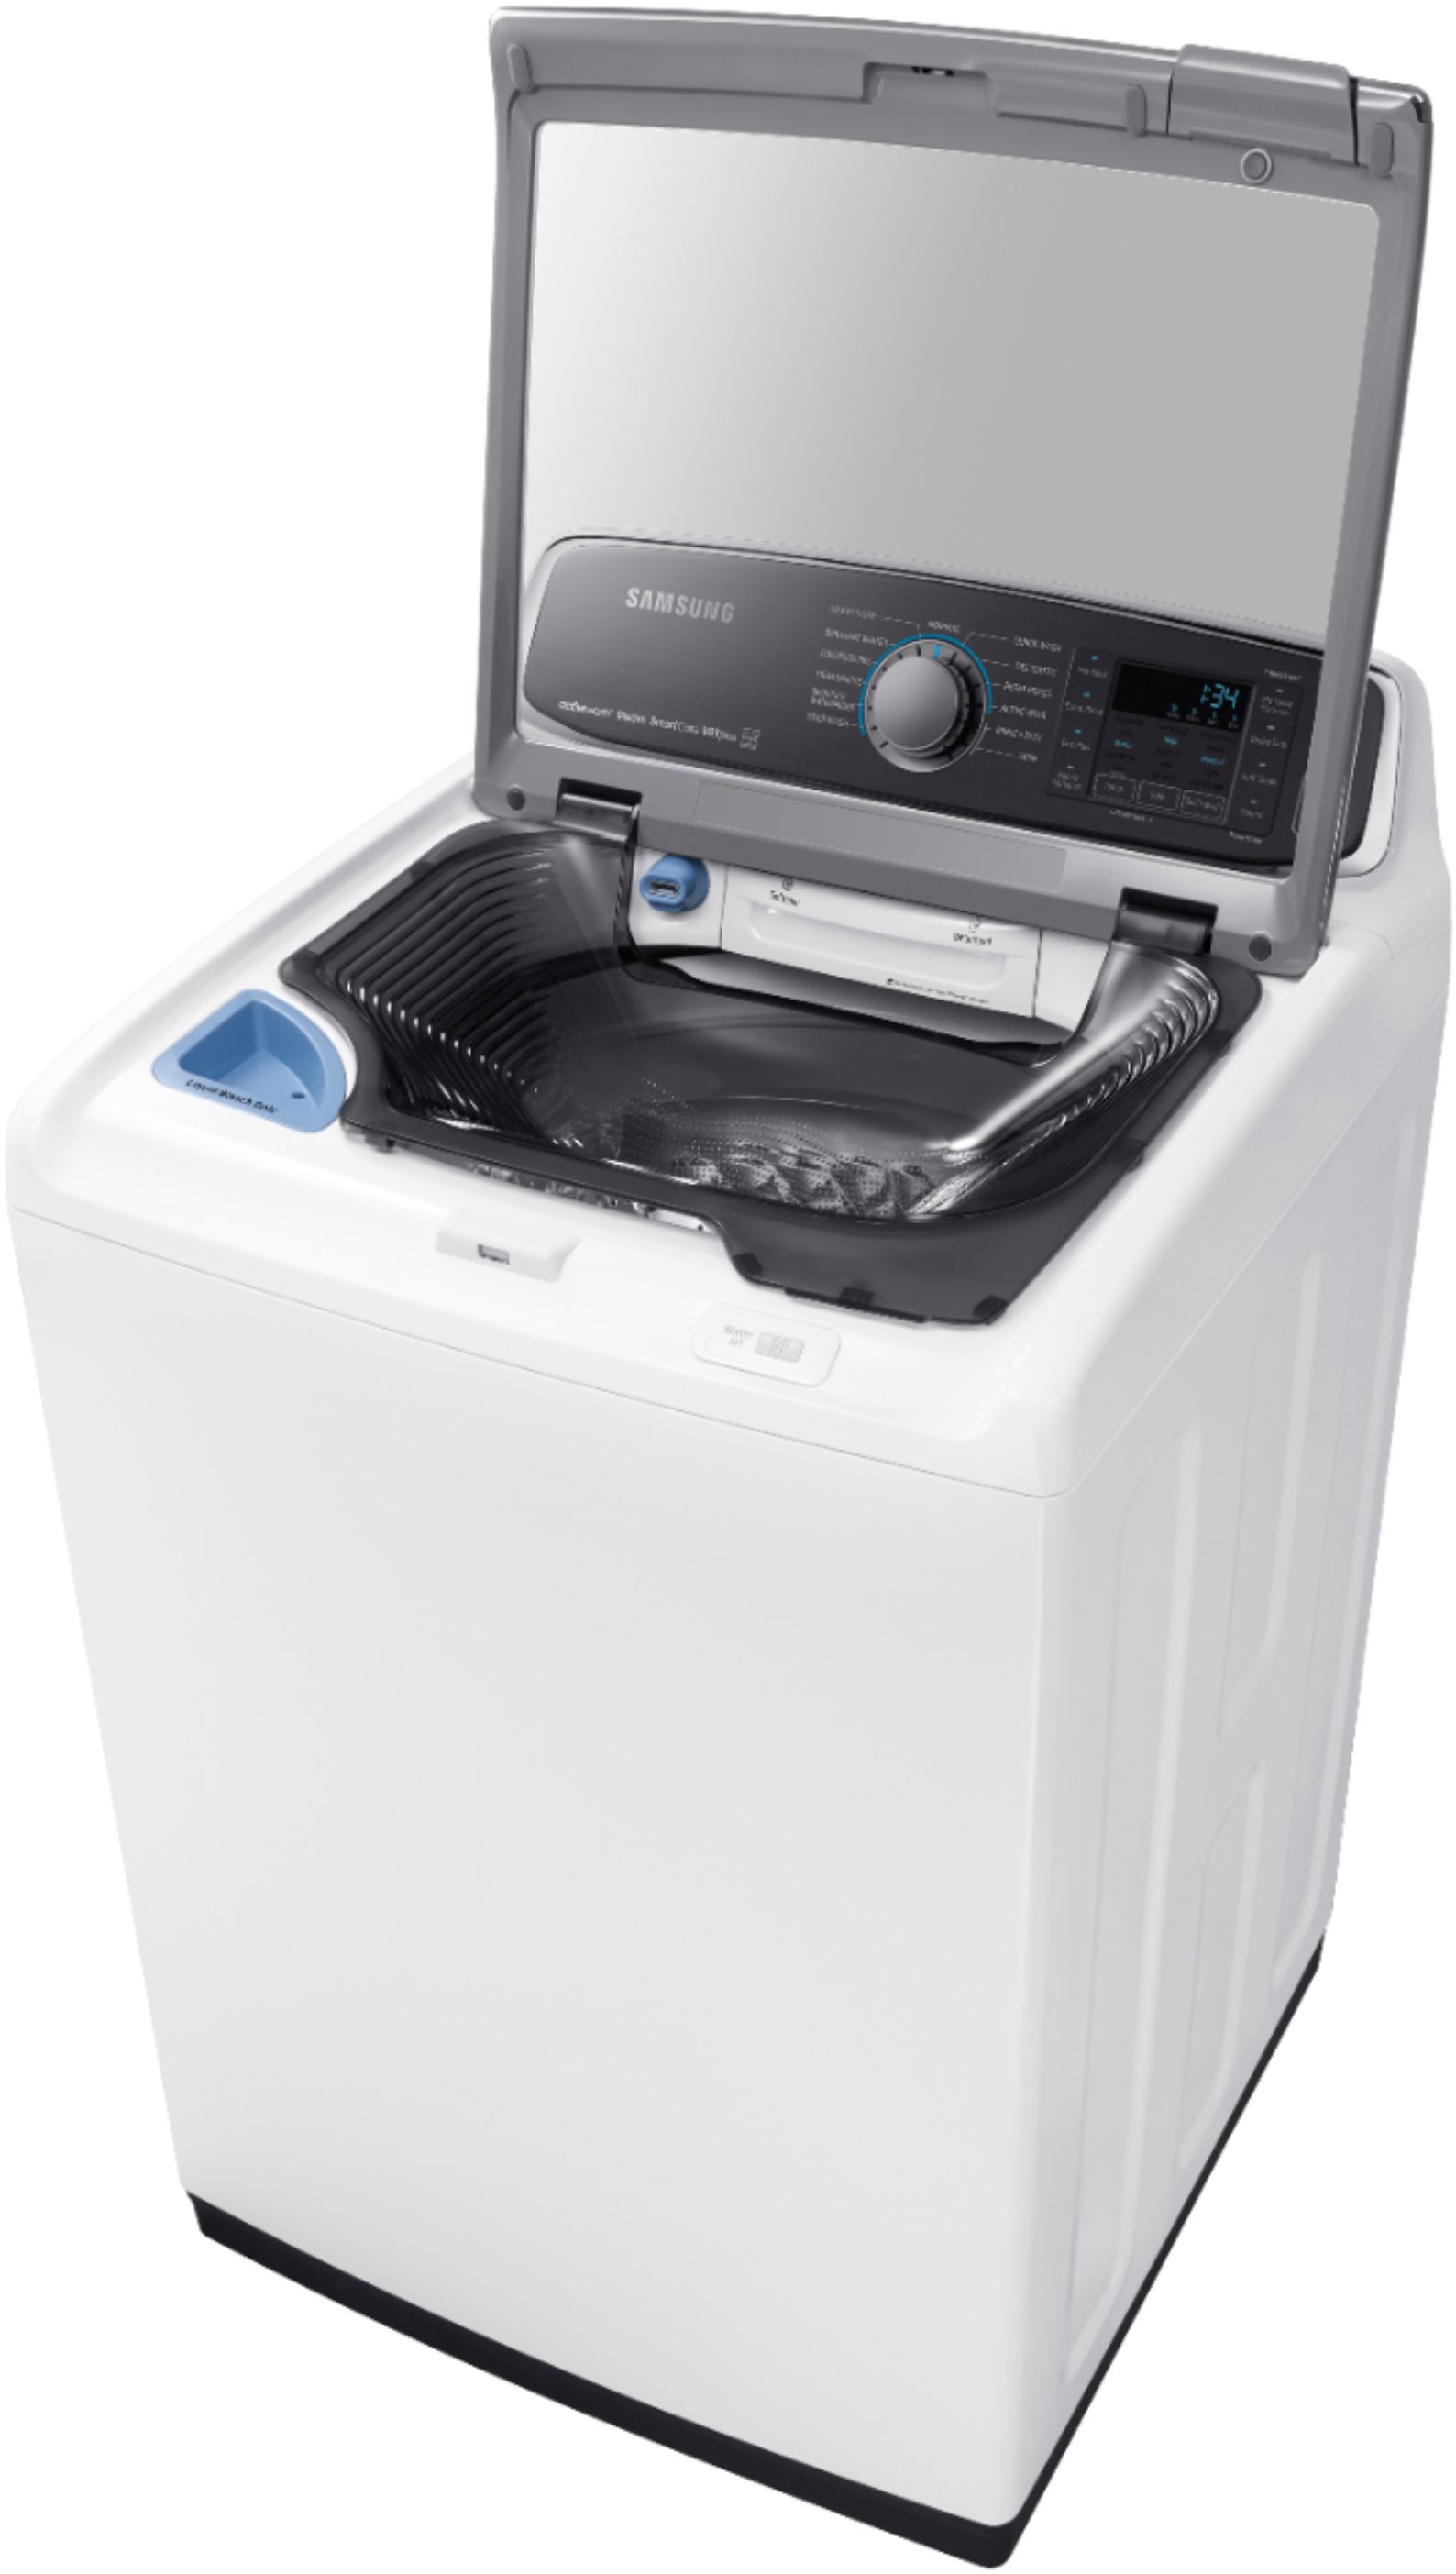 5.2 cu. ft. activewash Top Load Washer in White Washer - WA52M7750AW/A4